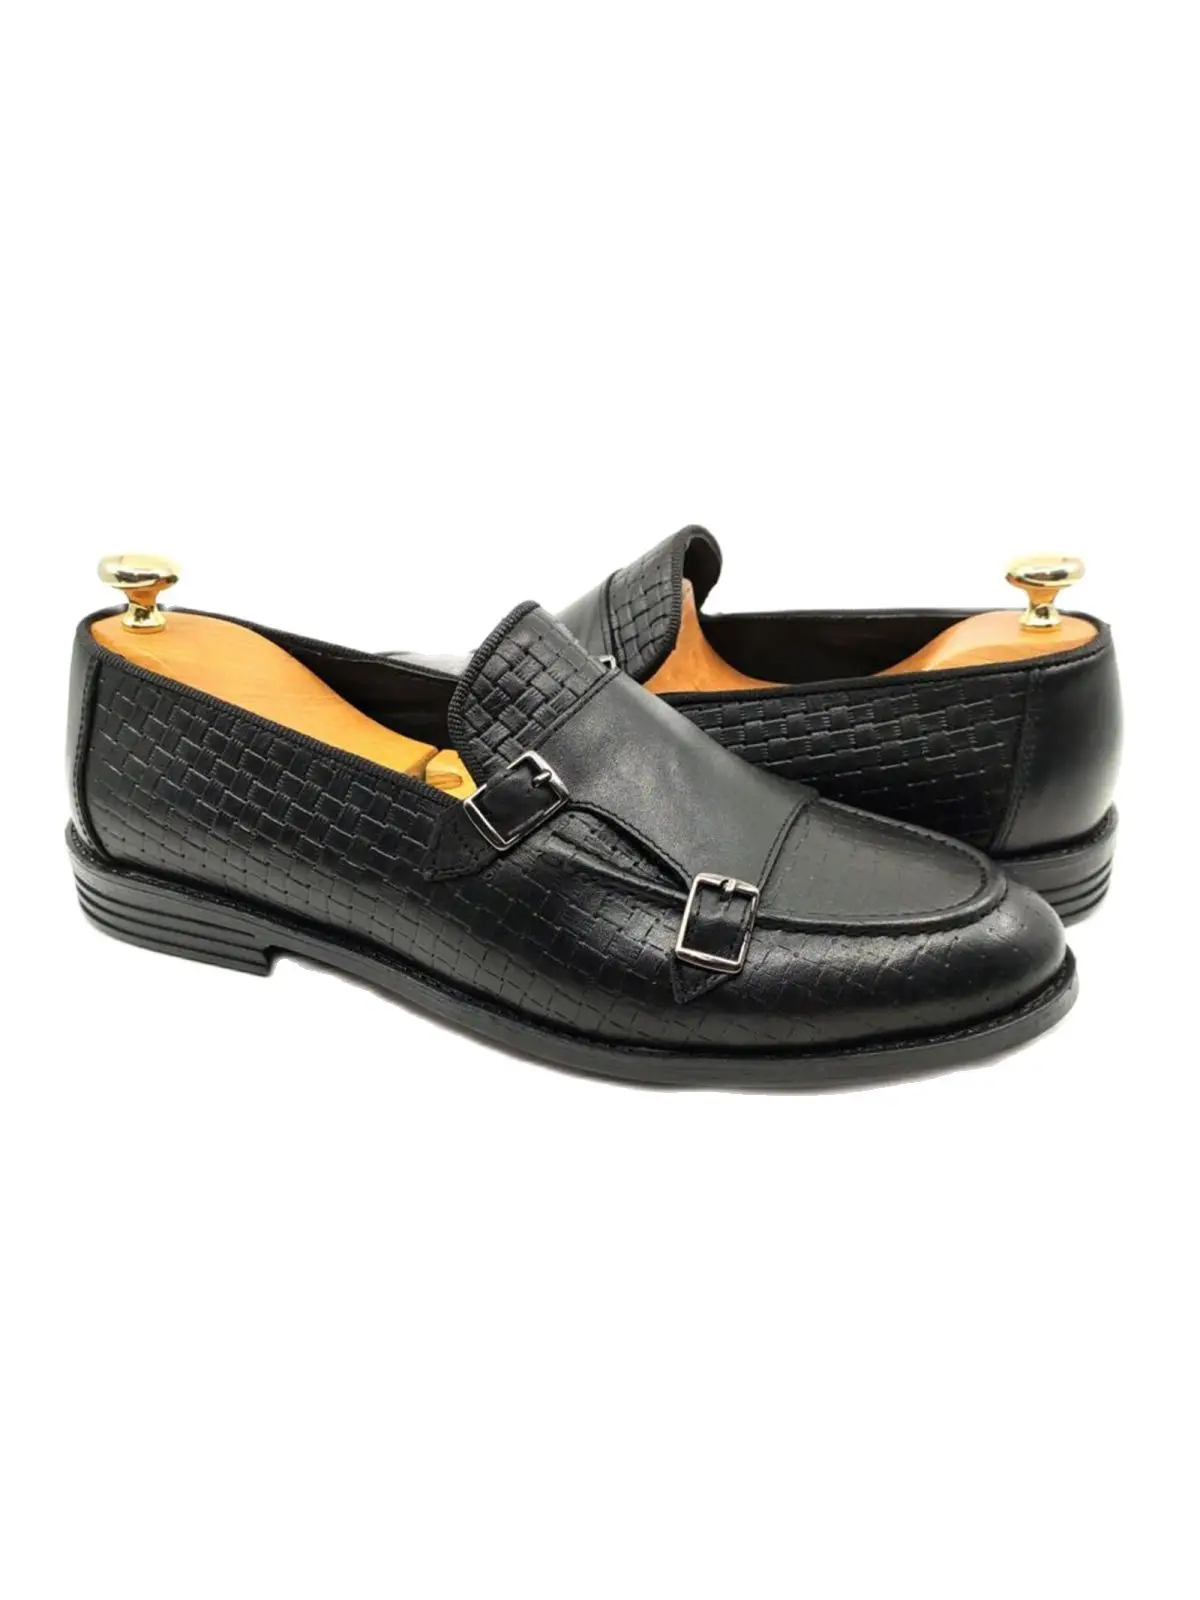 

DeepSEA Male Genuine Leather Shoes Double Iron Buckles Injection Based Business Office Career Casual Wedding Groom Meeting 2104497